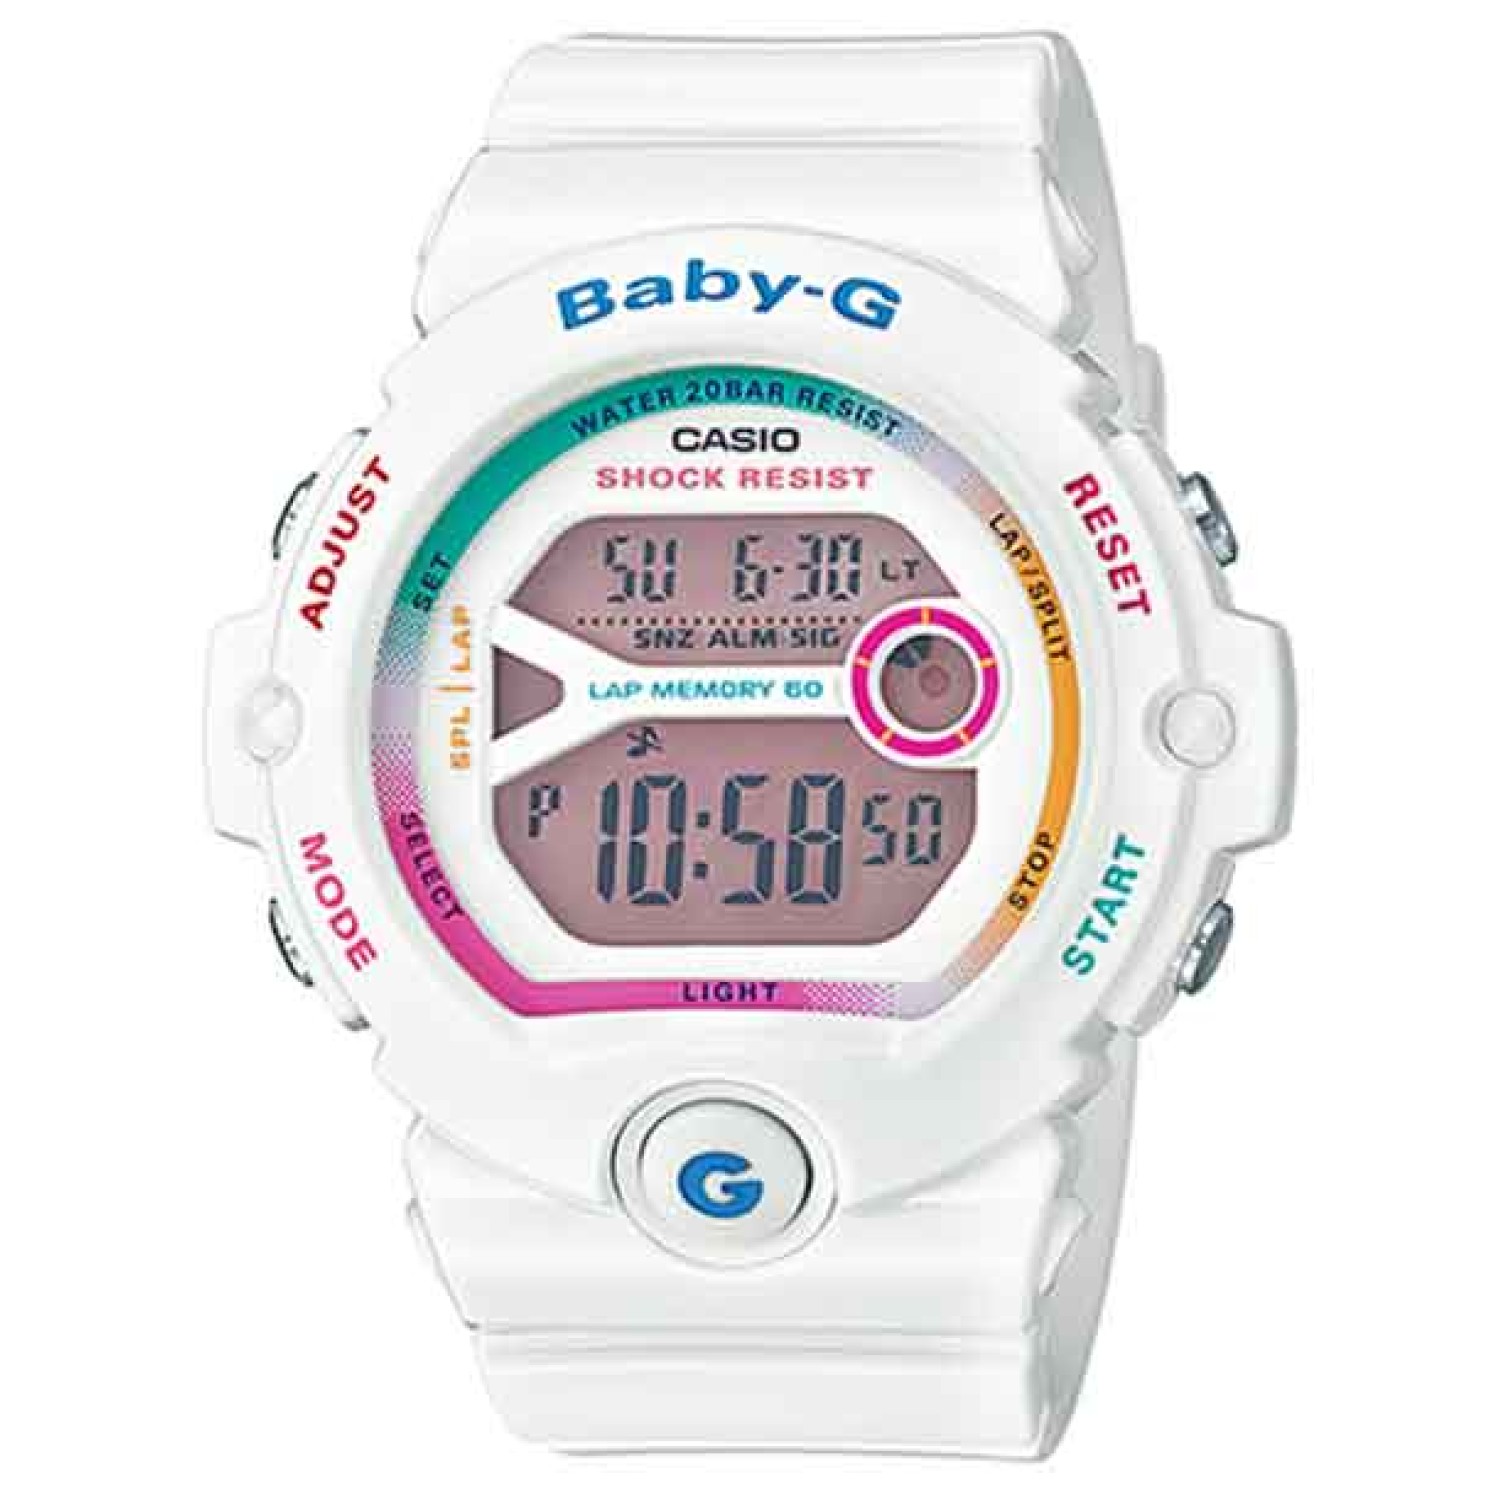 BG6903-7C Casio BabY-G Runners Watch. These Baby-G models have been specially designed with runners in mind. The stopwatch is equipped with memory for up to 60 laps, and a large case design enables easy reading of elapsed time and lap times while running.